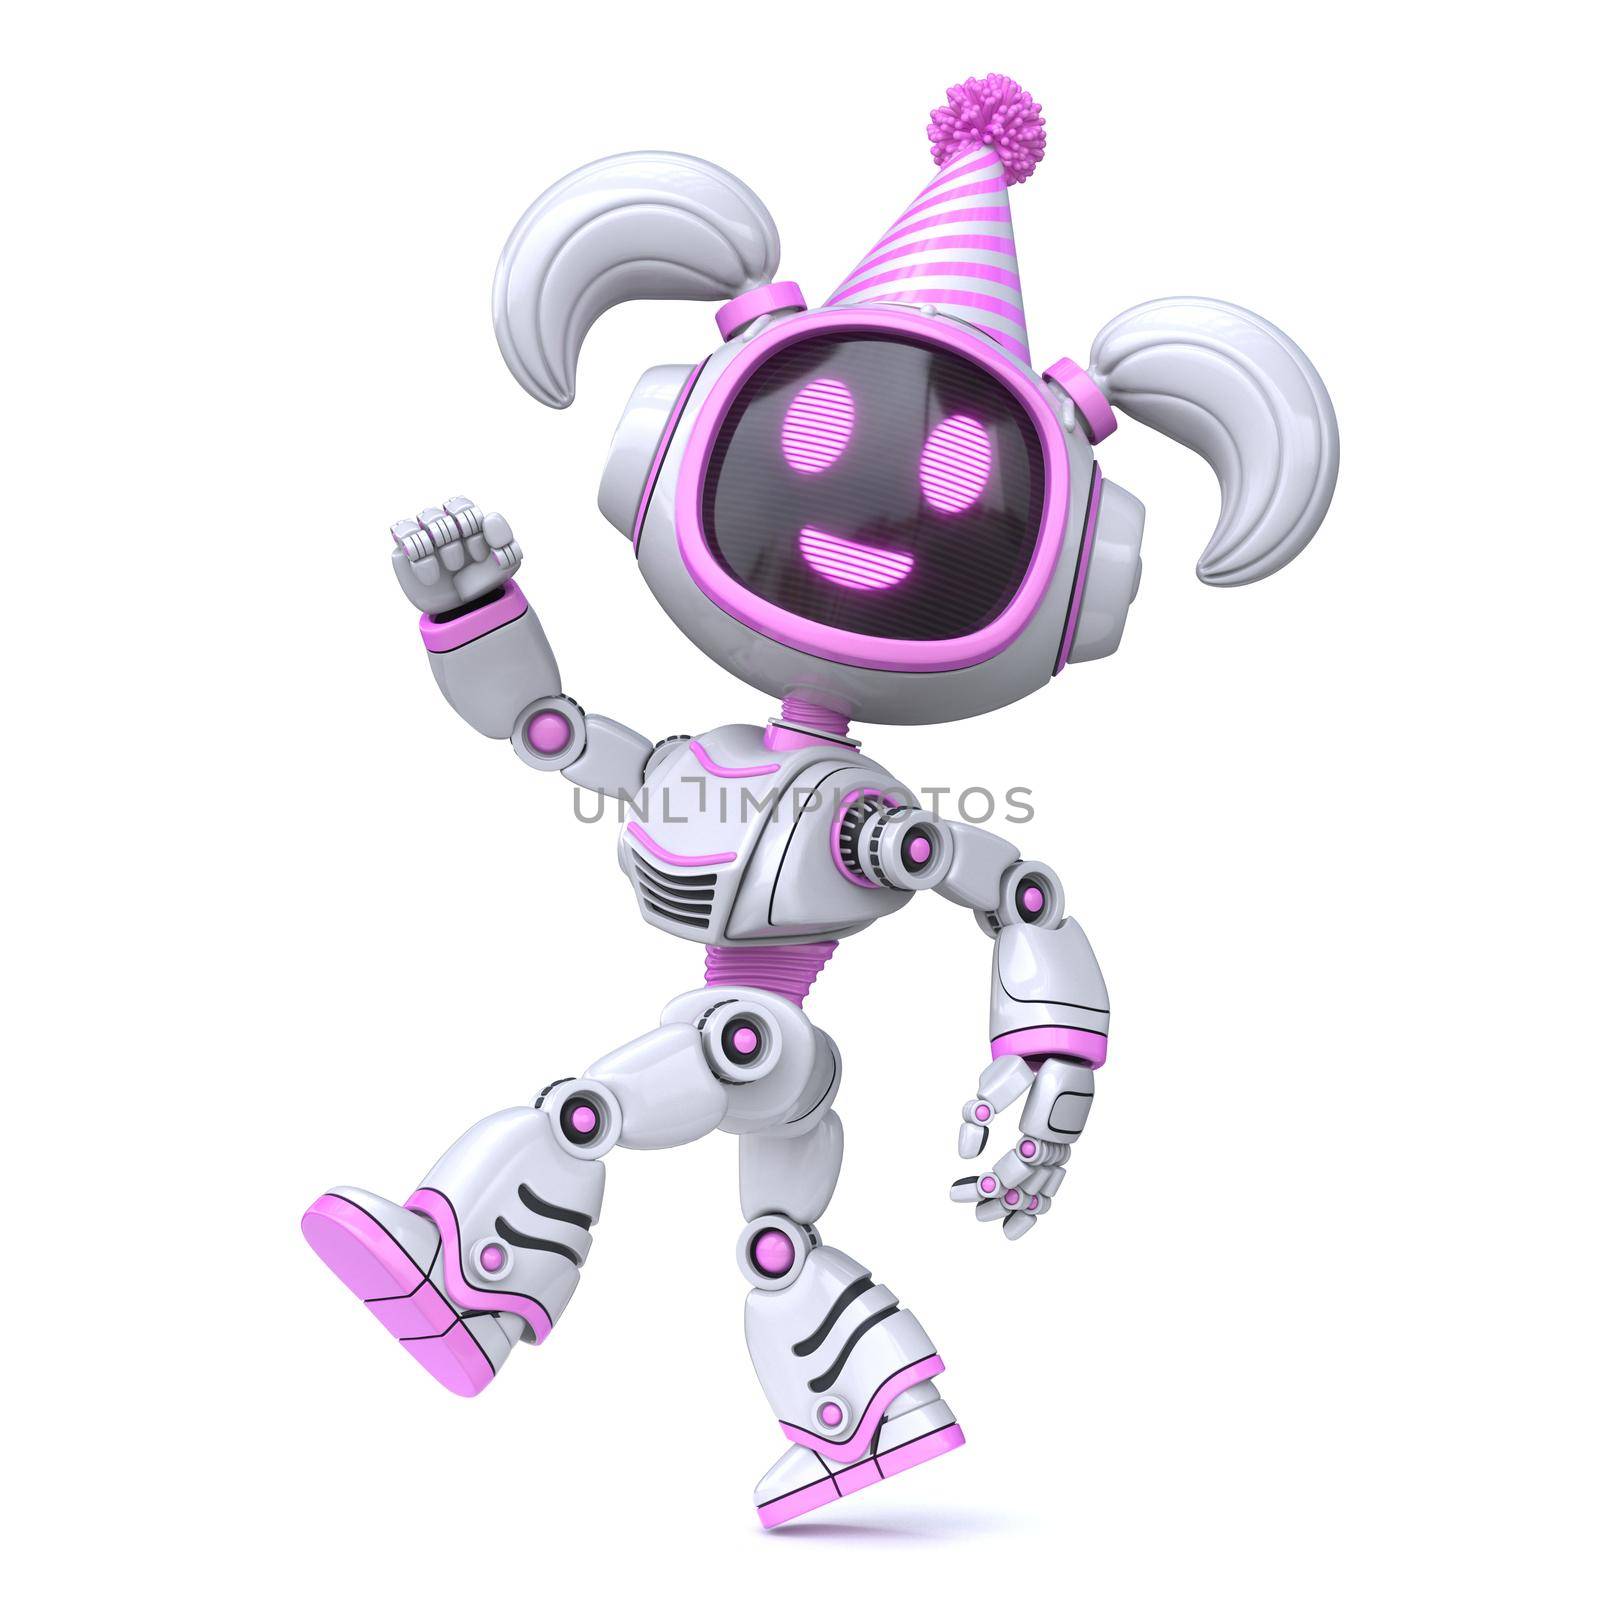 Cute pink girl robot celebrate birthday 3D rendering illustration isolated on white background